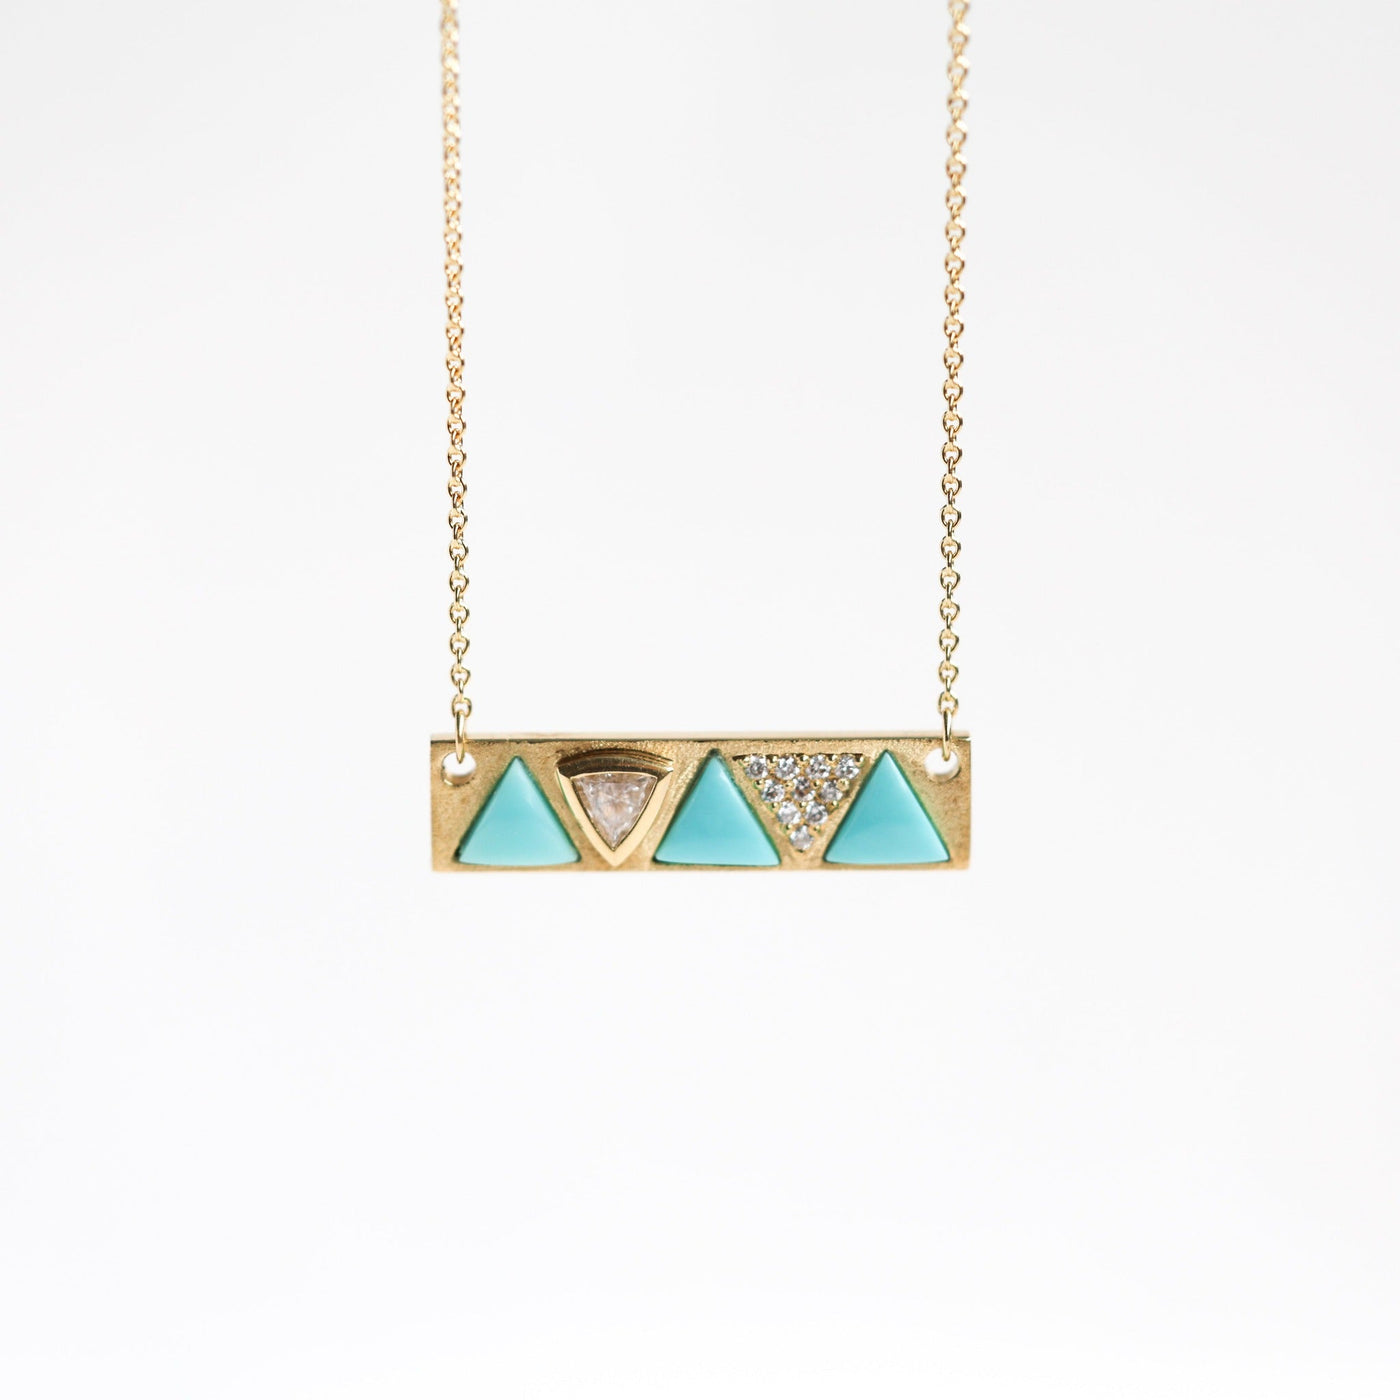 Gold chain necklace with three trillion-cut blue turquoise stones and diamonds